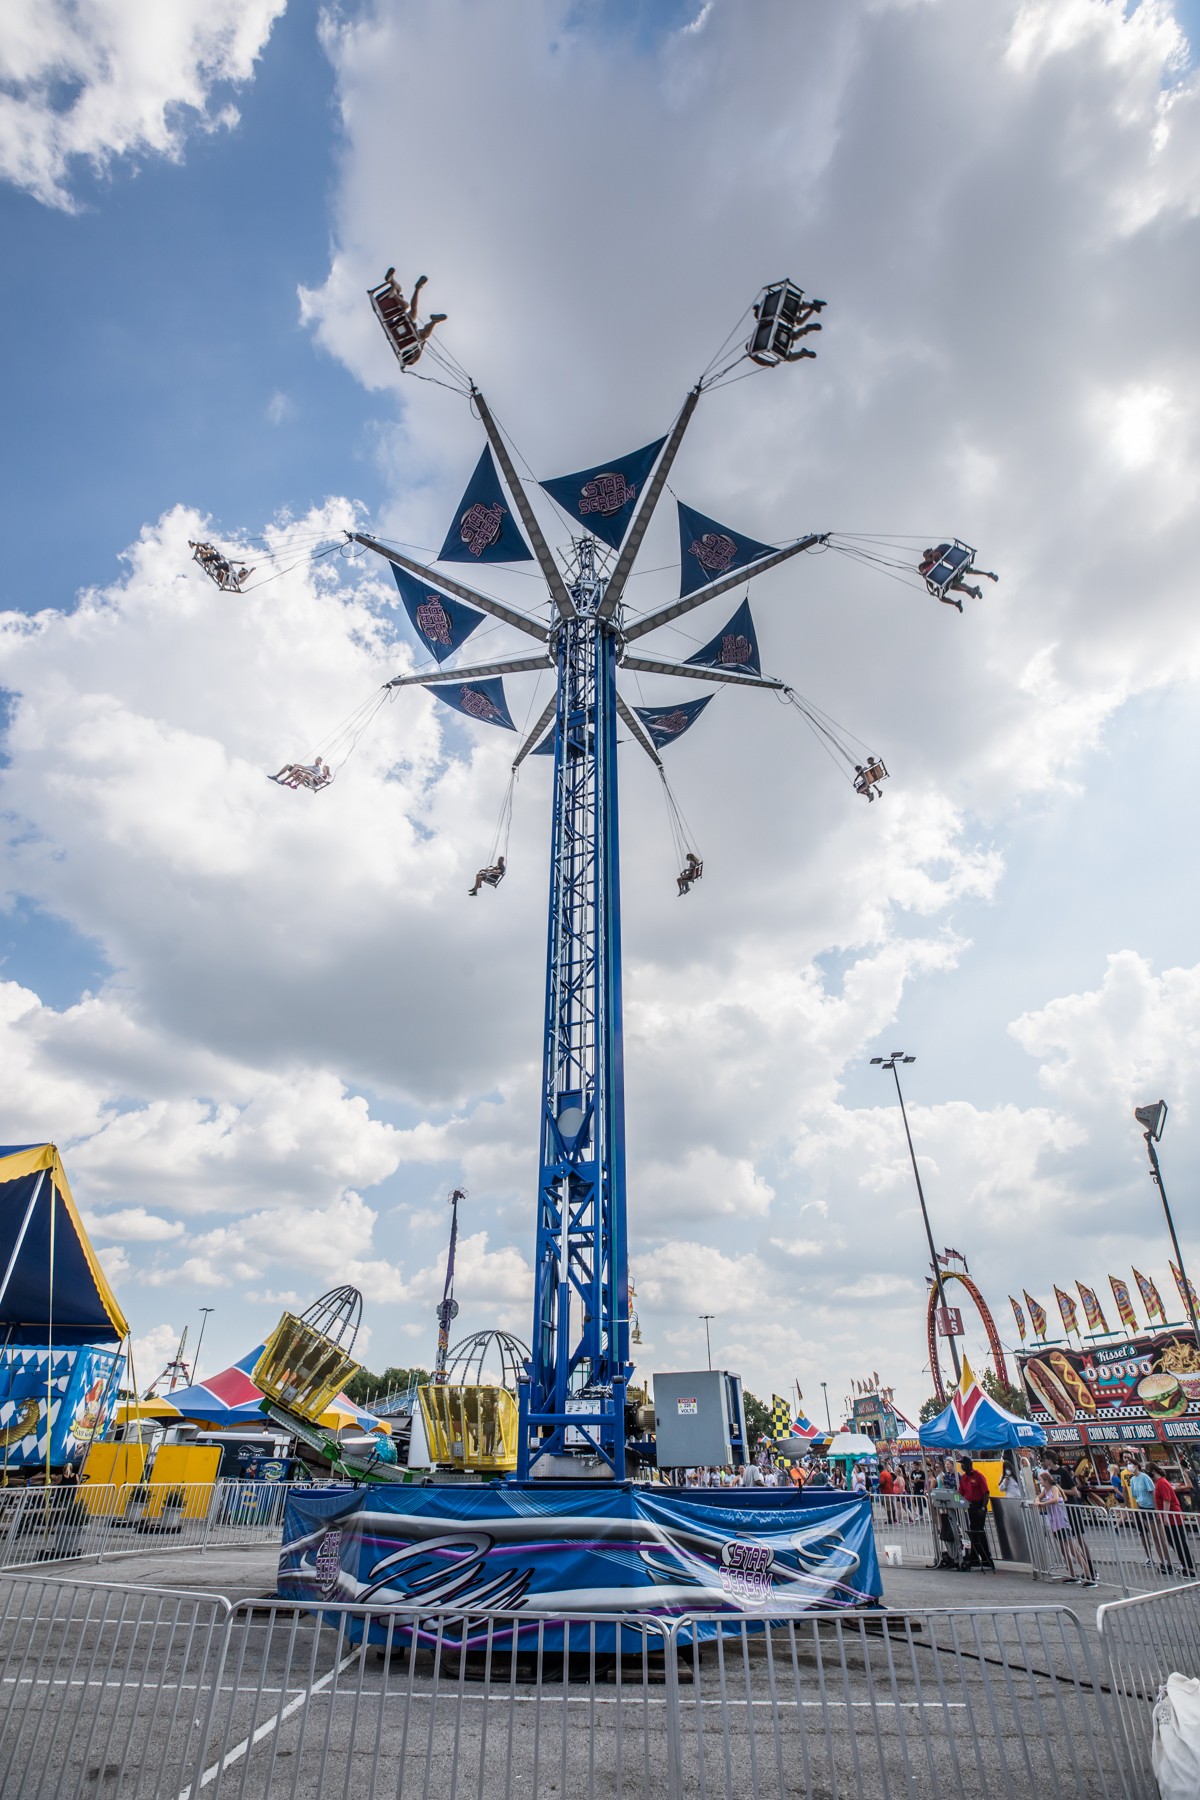 Flying high on the Star Scream at the Kentucky State Fair.